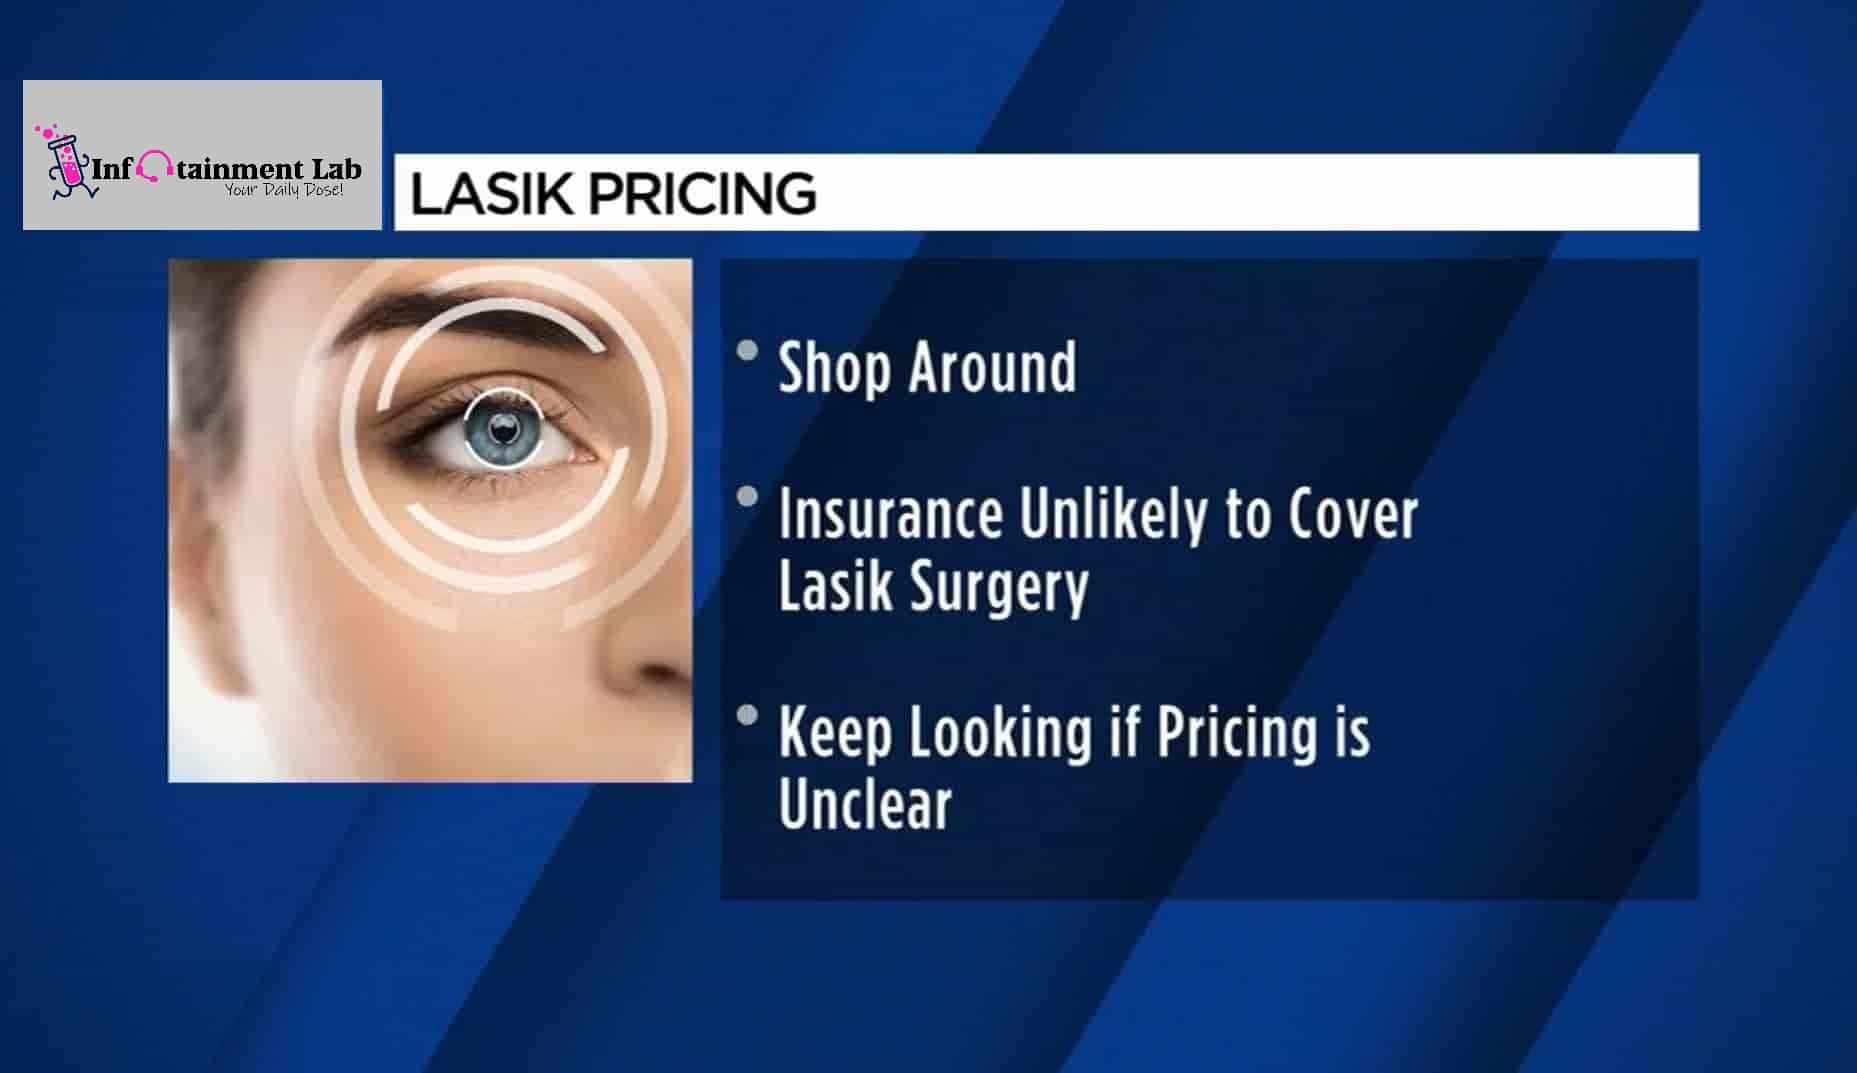 How Much Does LASIK Cost - LASIK Pricing